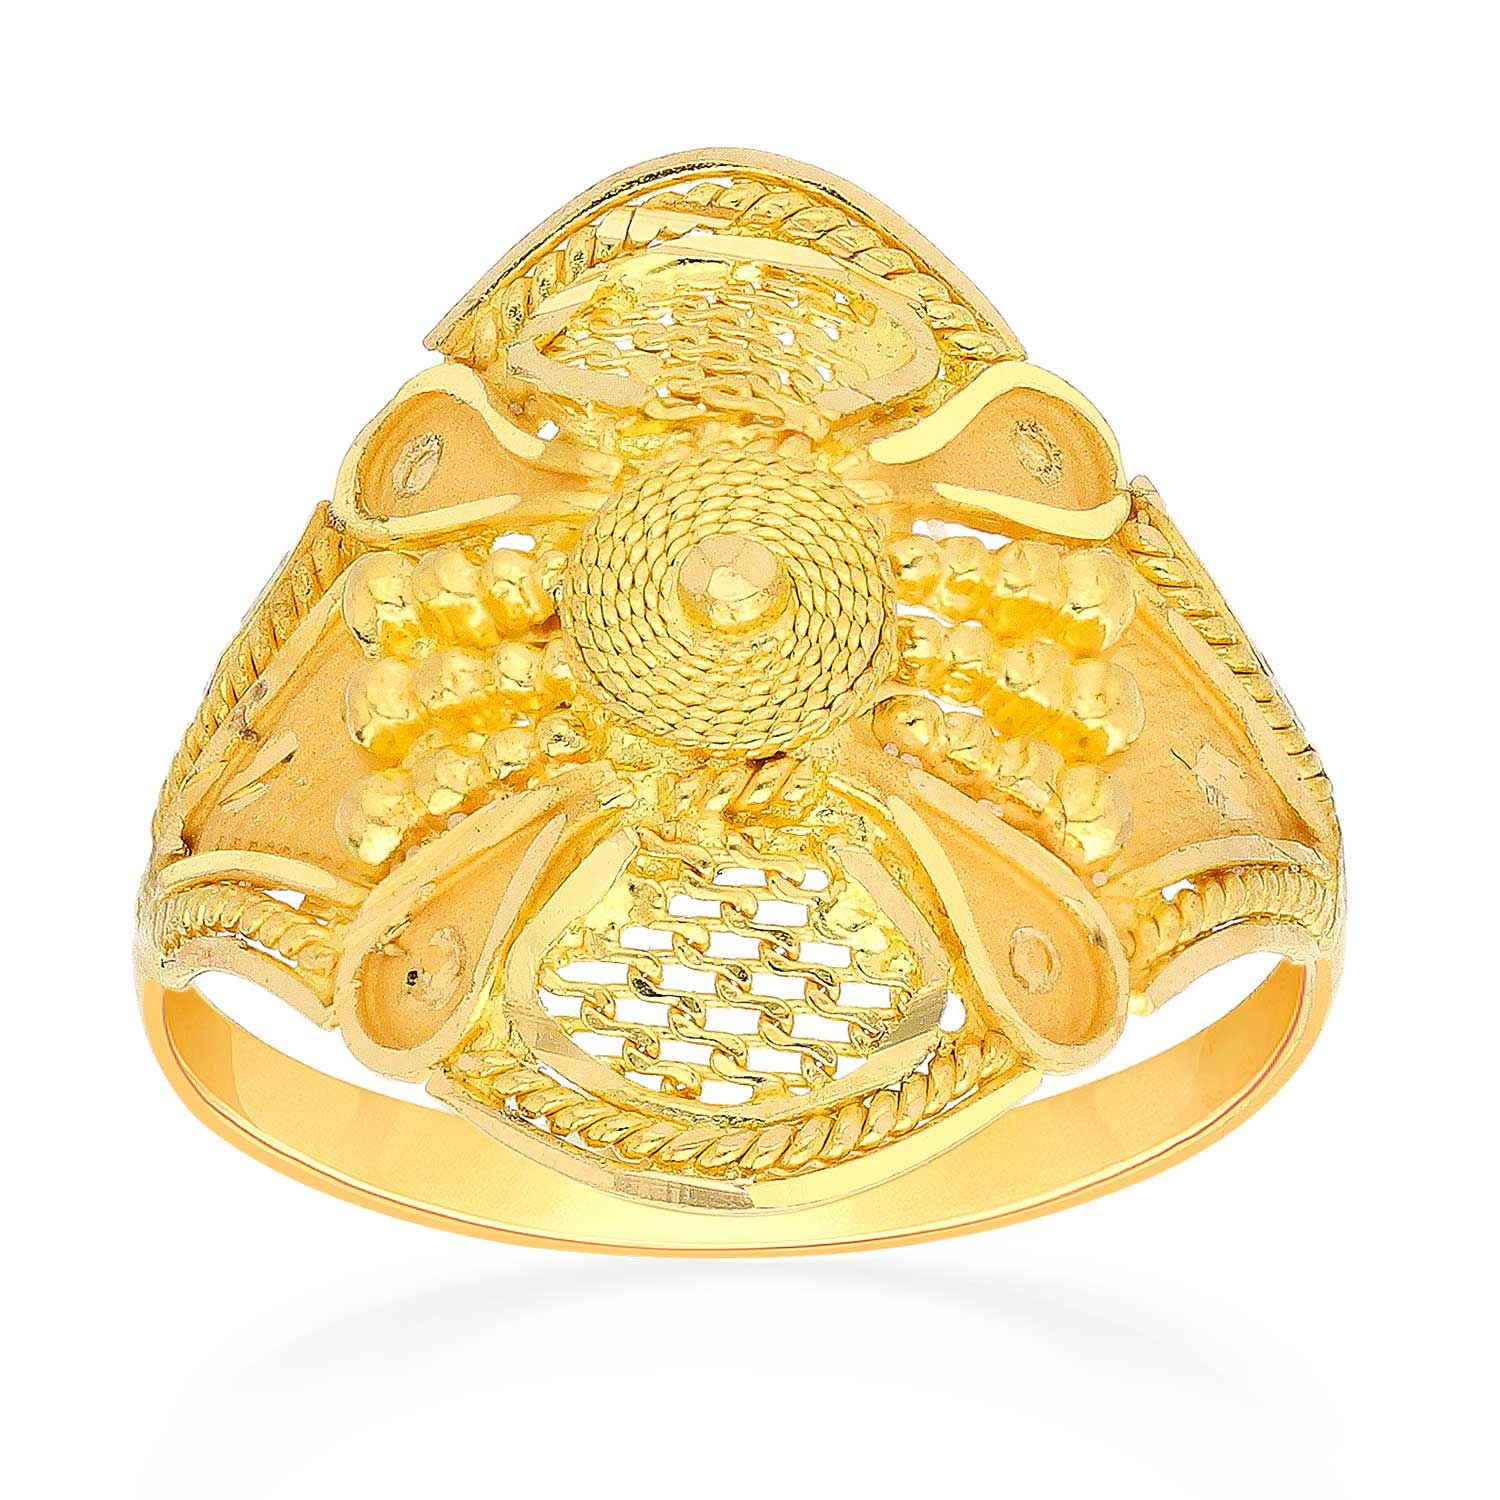 Buy MALABAR GOLD AND DIAMONDS Mens 22KT Gold Ring- Size 20 | Shoppers Stop